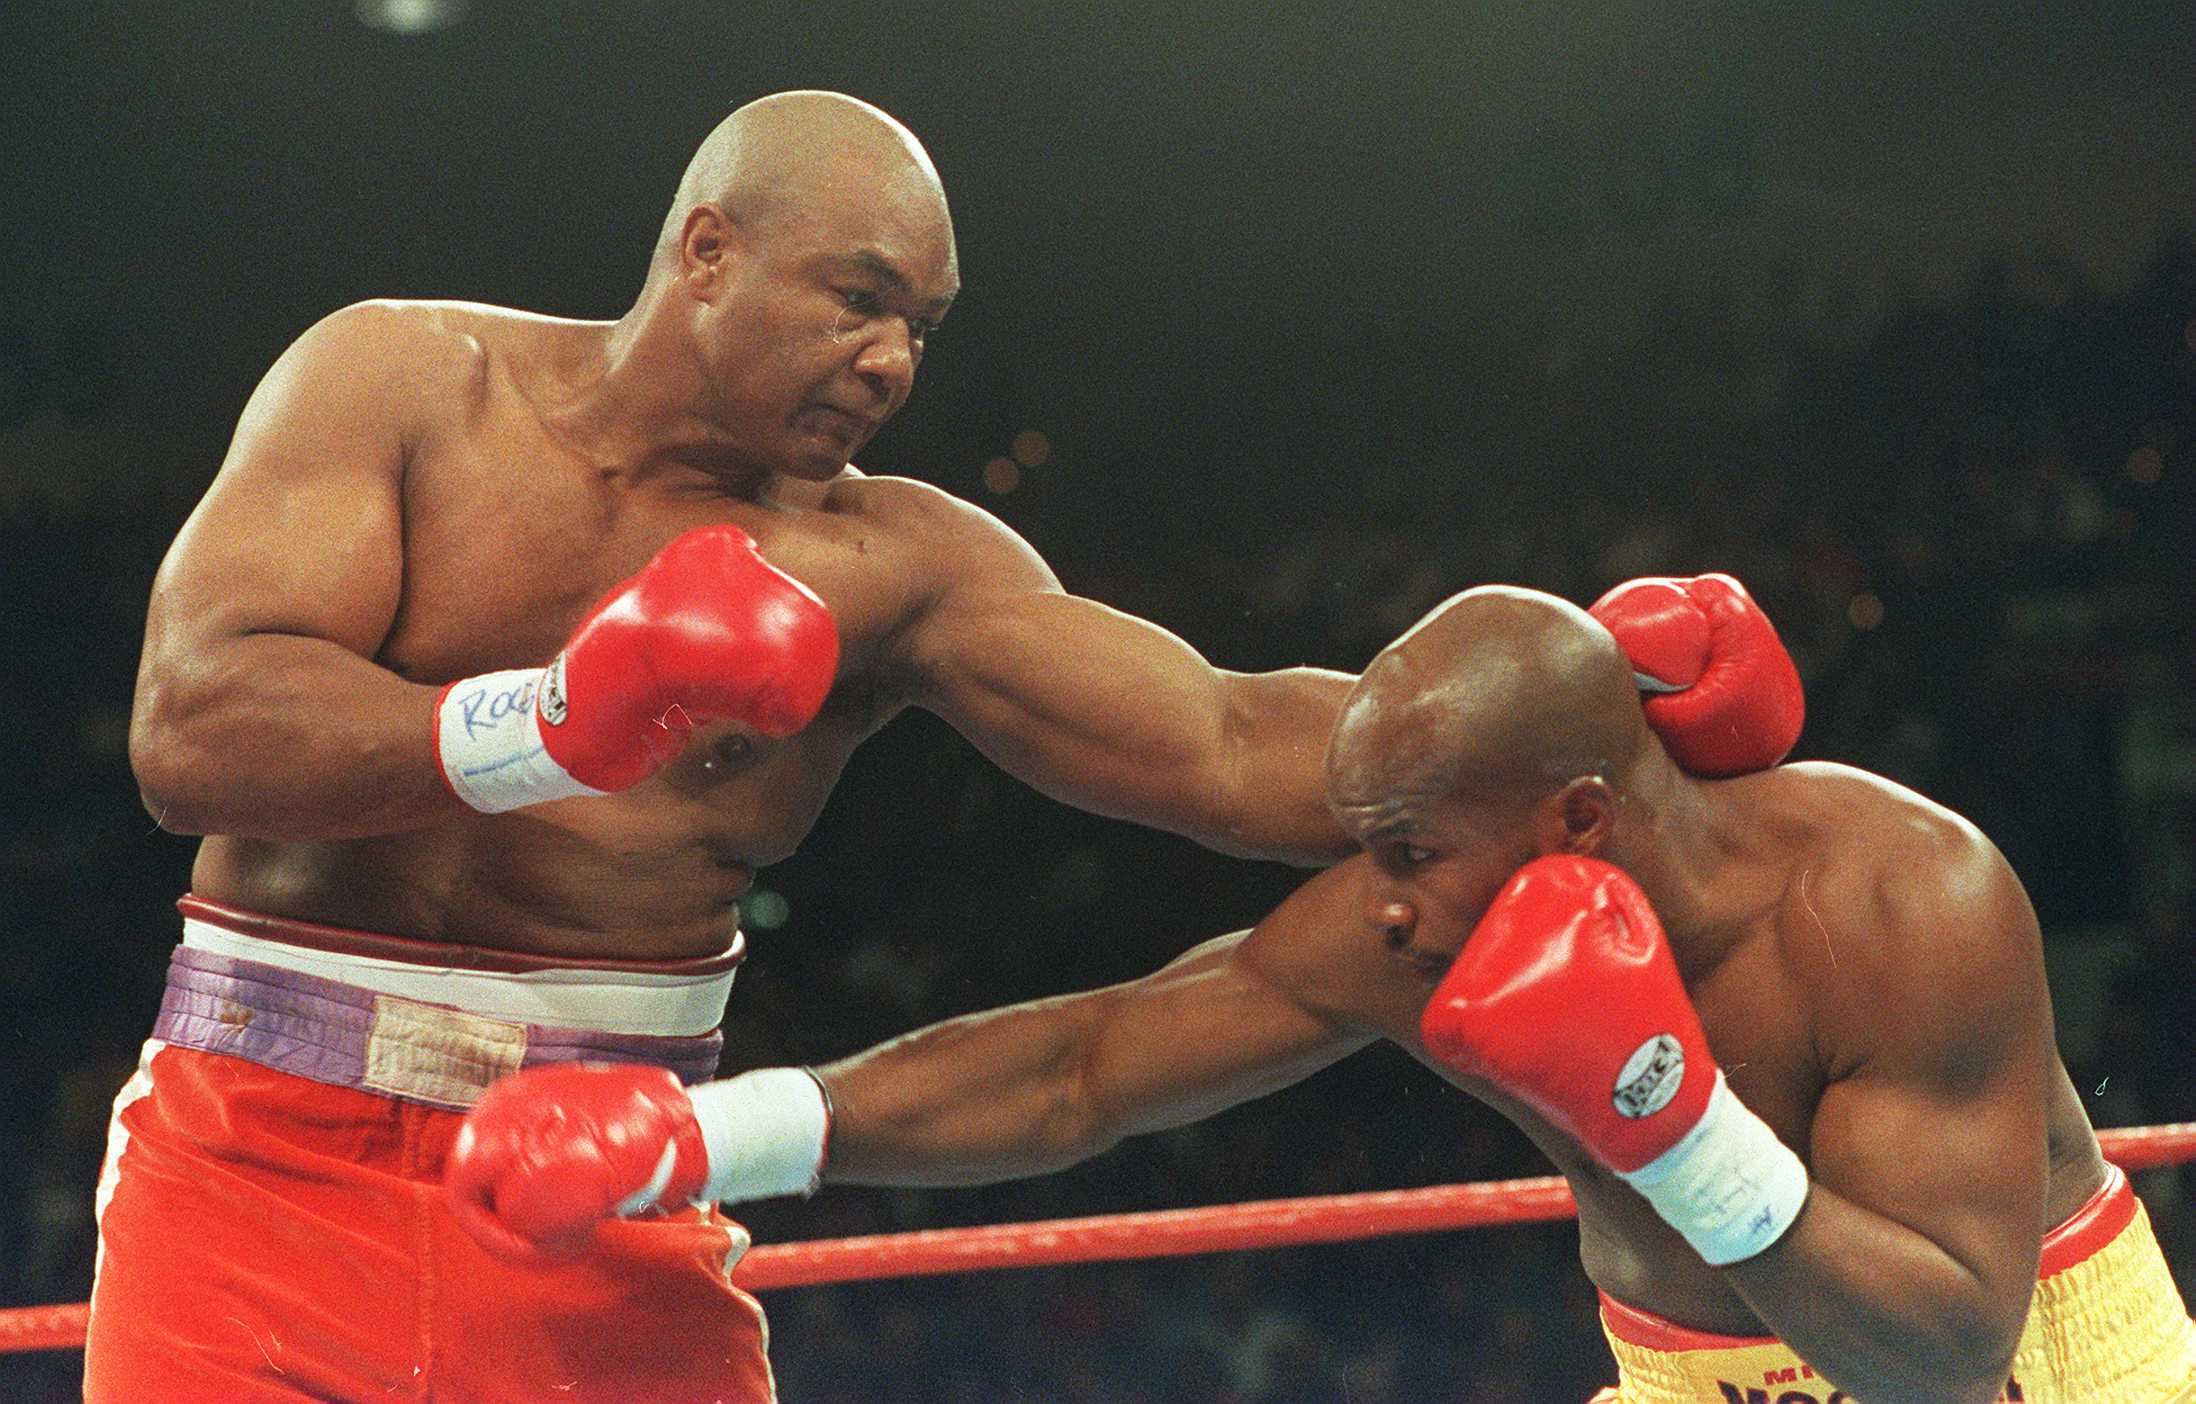 5 NOV 1994:  GEORGE FOREMAN THROWS A LEFT AT  MICHAEL MOORER TONIGHT DURING THE FIRST ROUND OF THEIR WBA/IBF HEAVYWEIGHT TITLE FIGHT AT THE MGM GRAND IN LAS VEGAS, NEVADA.  FOREMAN WENT ON TO WIN THE FIGHT, AND THE TITLES, WITH A 10TH ROUND KNOCK OUT. Man